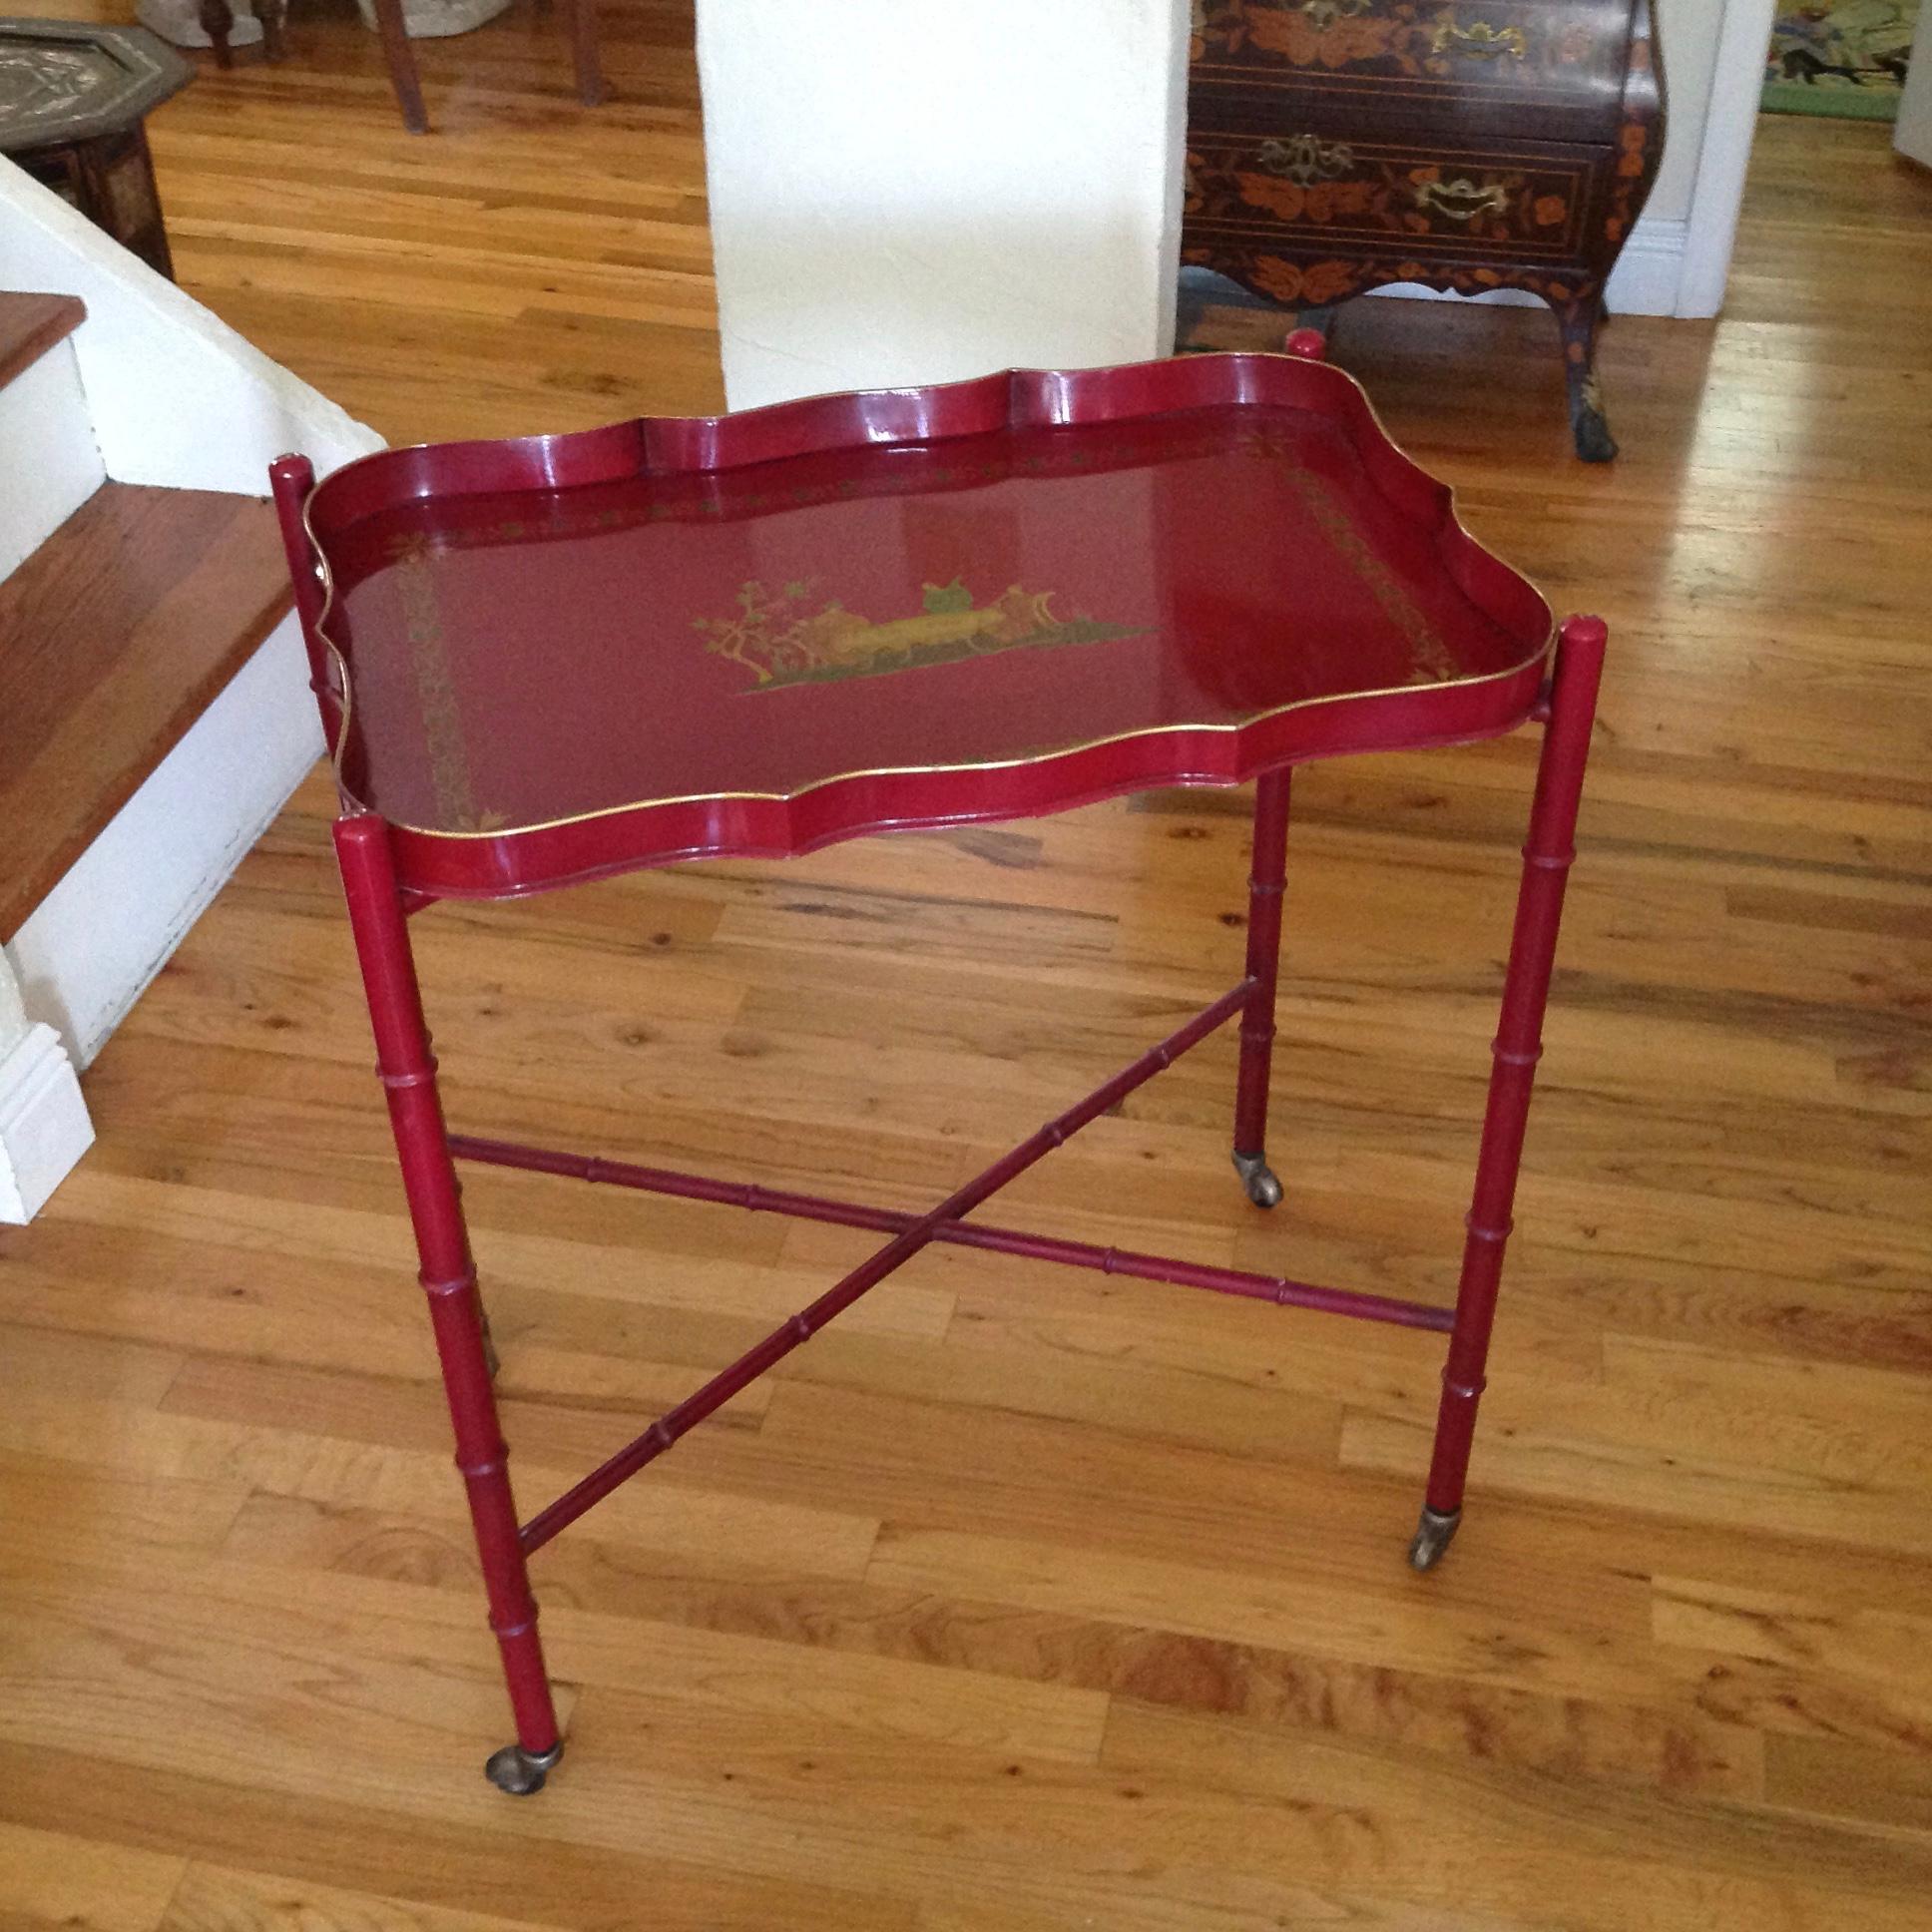 Bar cart height, with outstanding gold pen work against the red background.
Tray (26